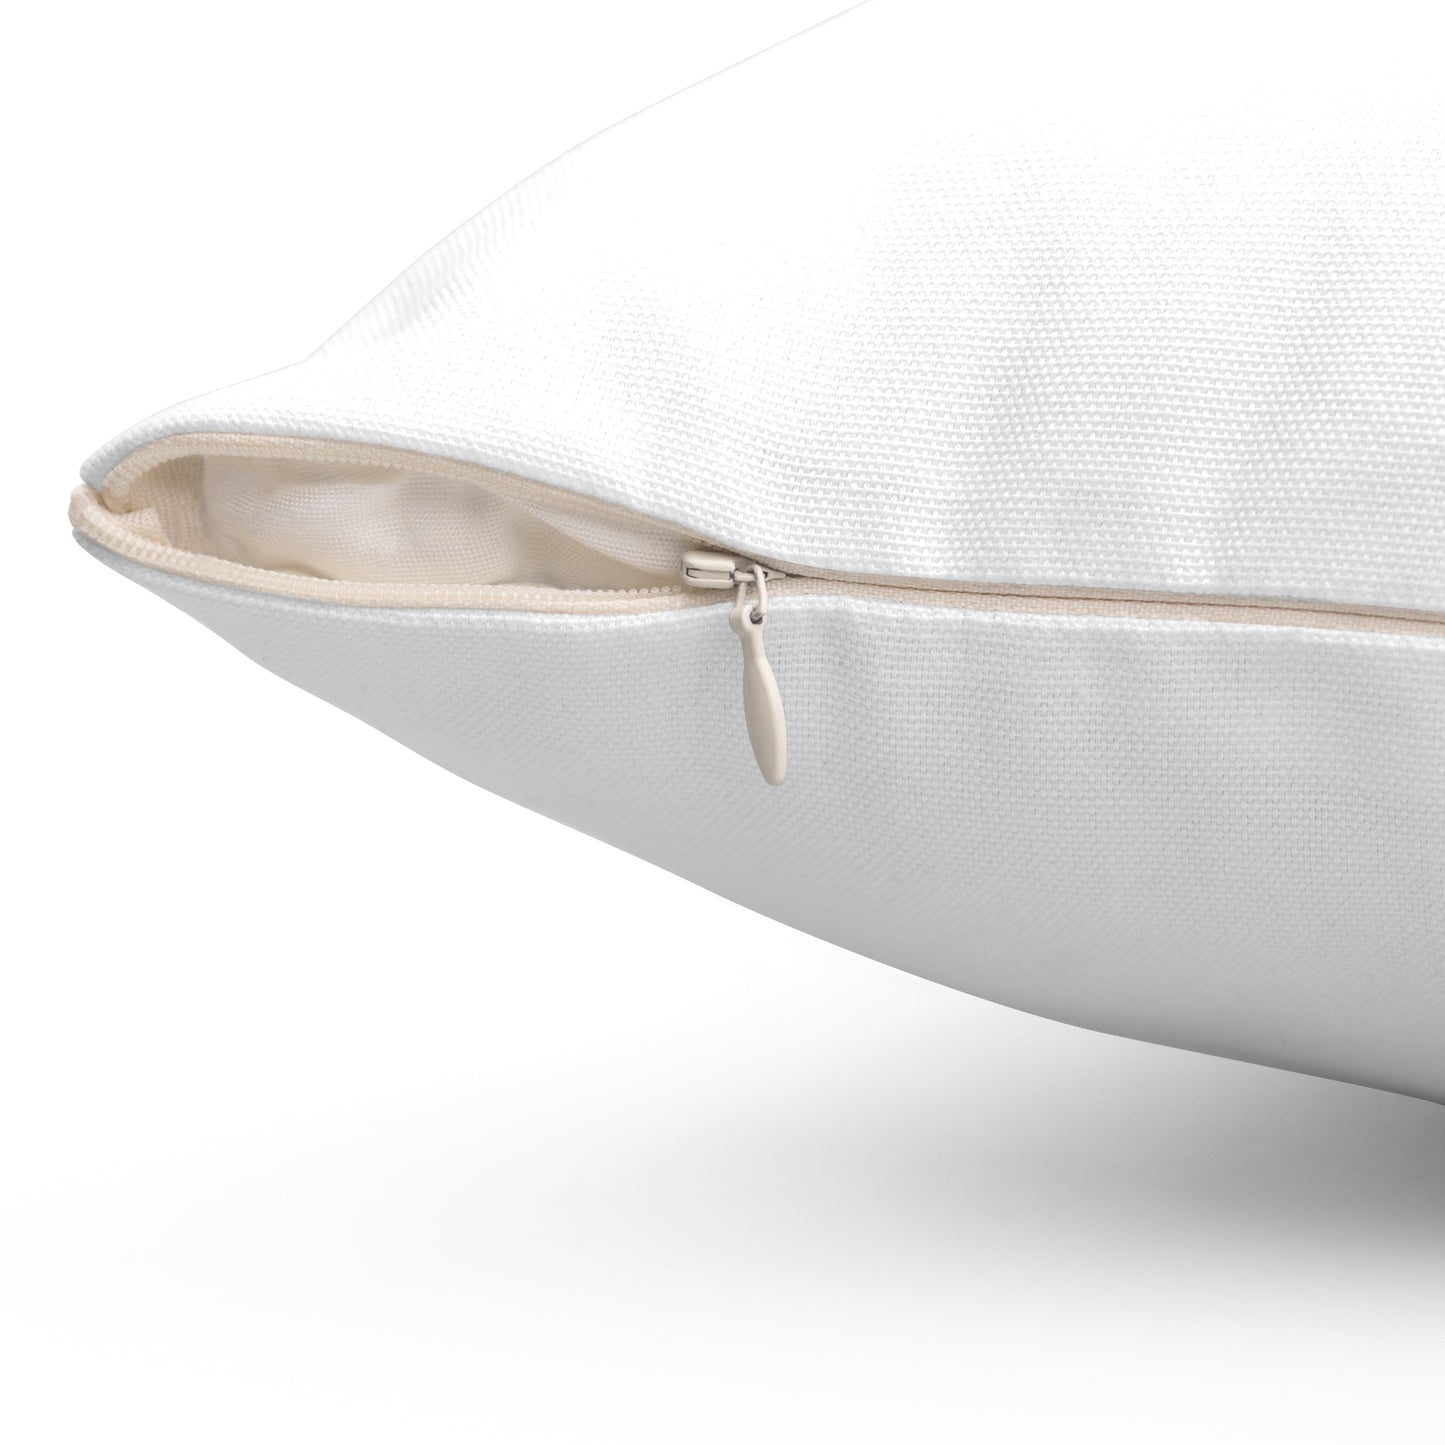 The Chaplain's Pillow, Chaplain Gifts by Chaplain Life®!